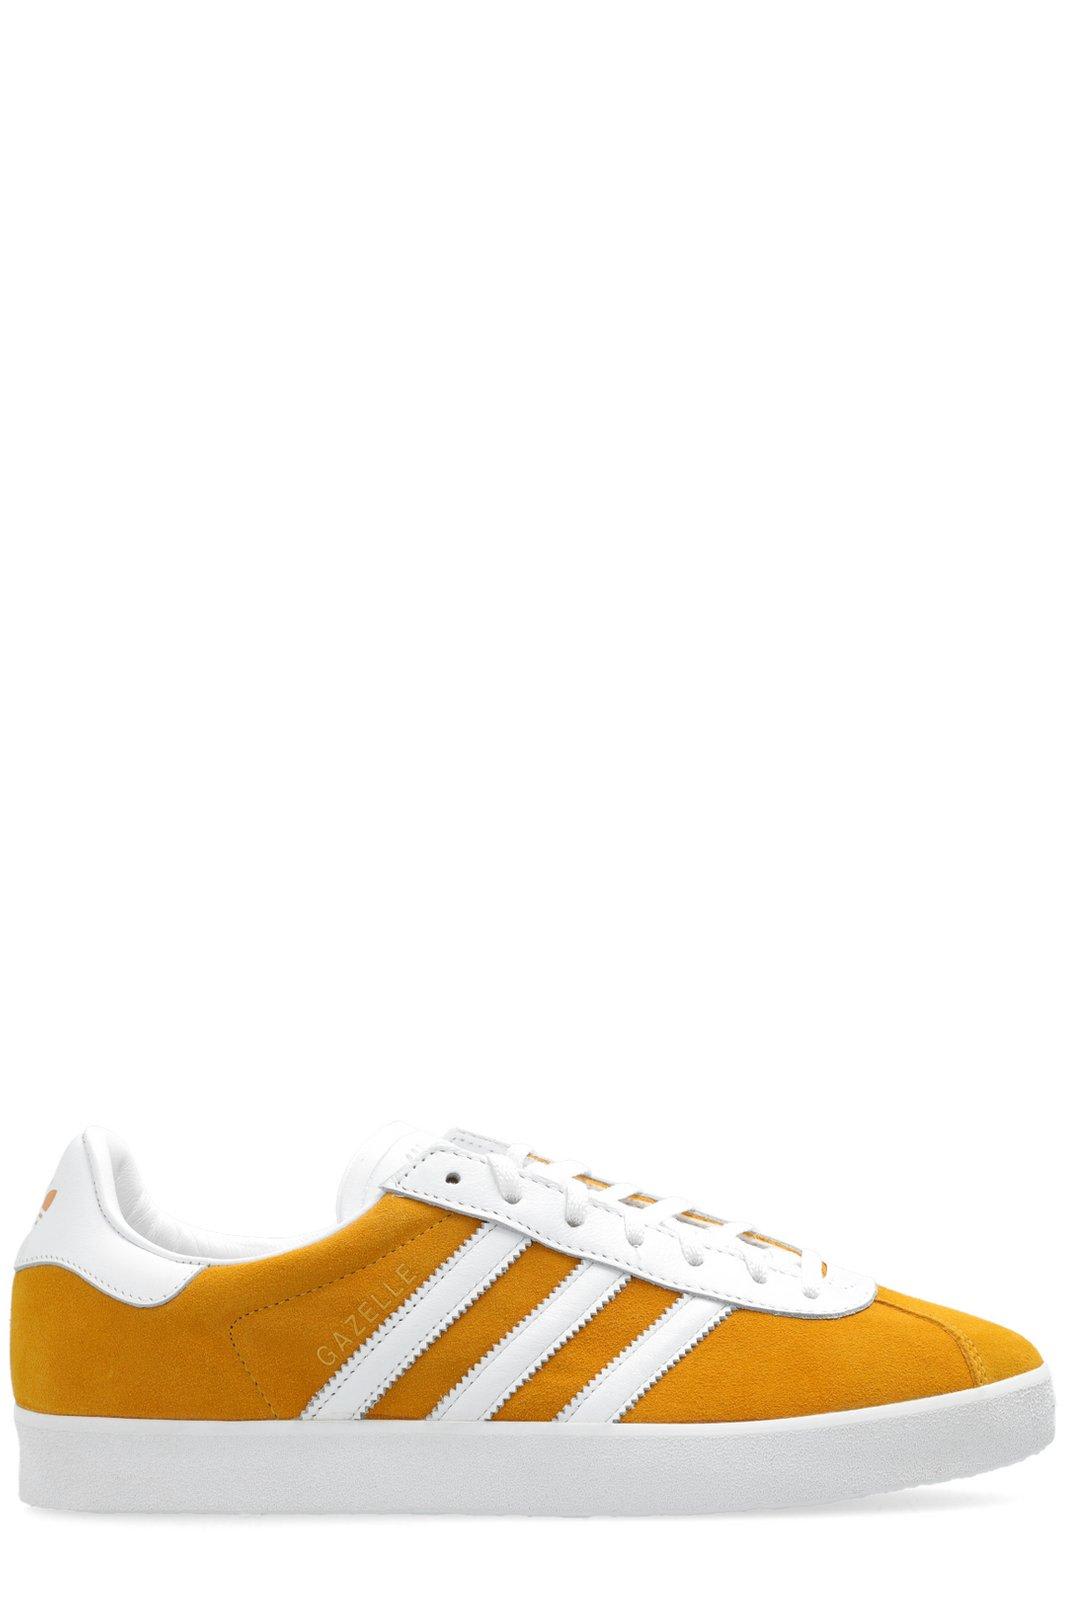 Shop Adidas Originals Gazelle 85 Lace-up Sneakers In Yellow